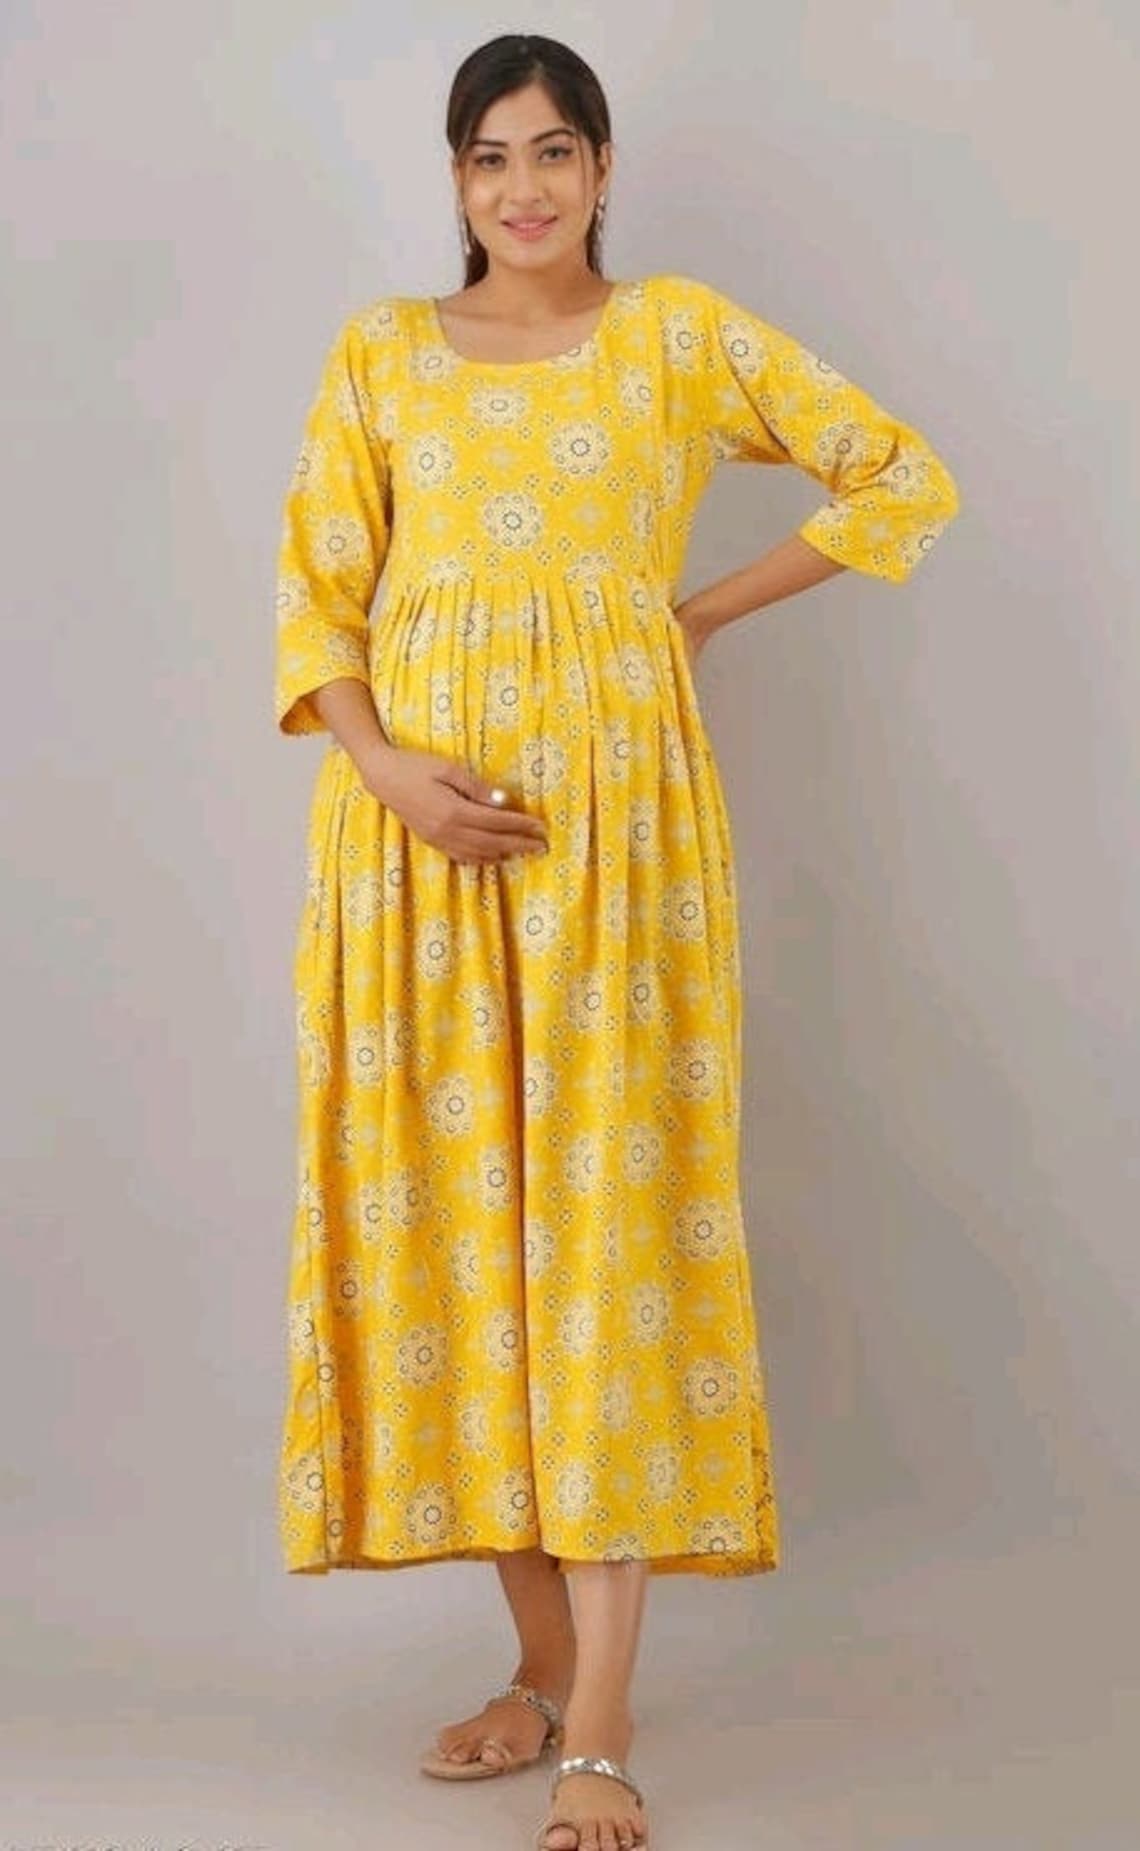 Attractive Pregnant / Maternity Women Kurti Gown Suit Easy | Etsy